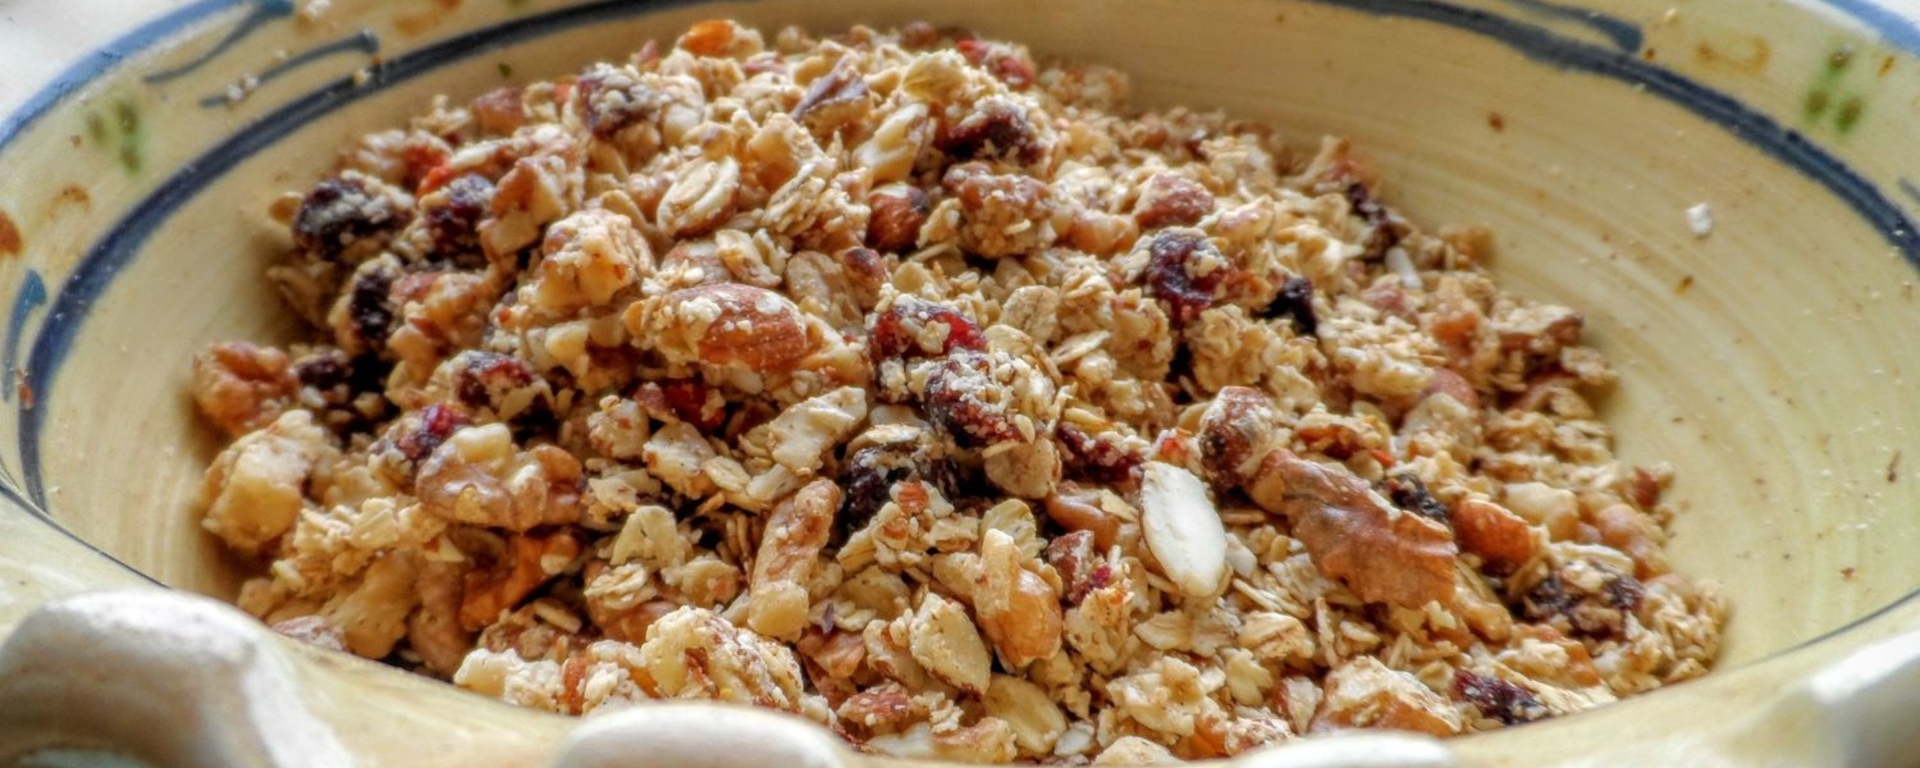 LuvMyRecipe.com - Granola with Almonds, Walnuts, Cranberries and Goji Berries Featured